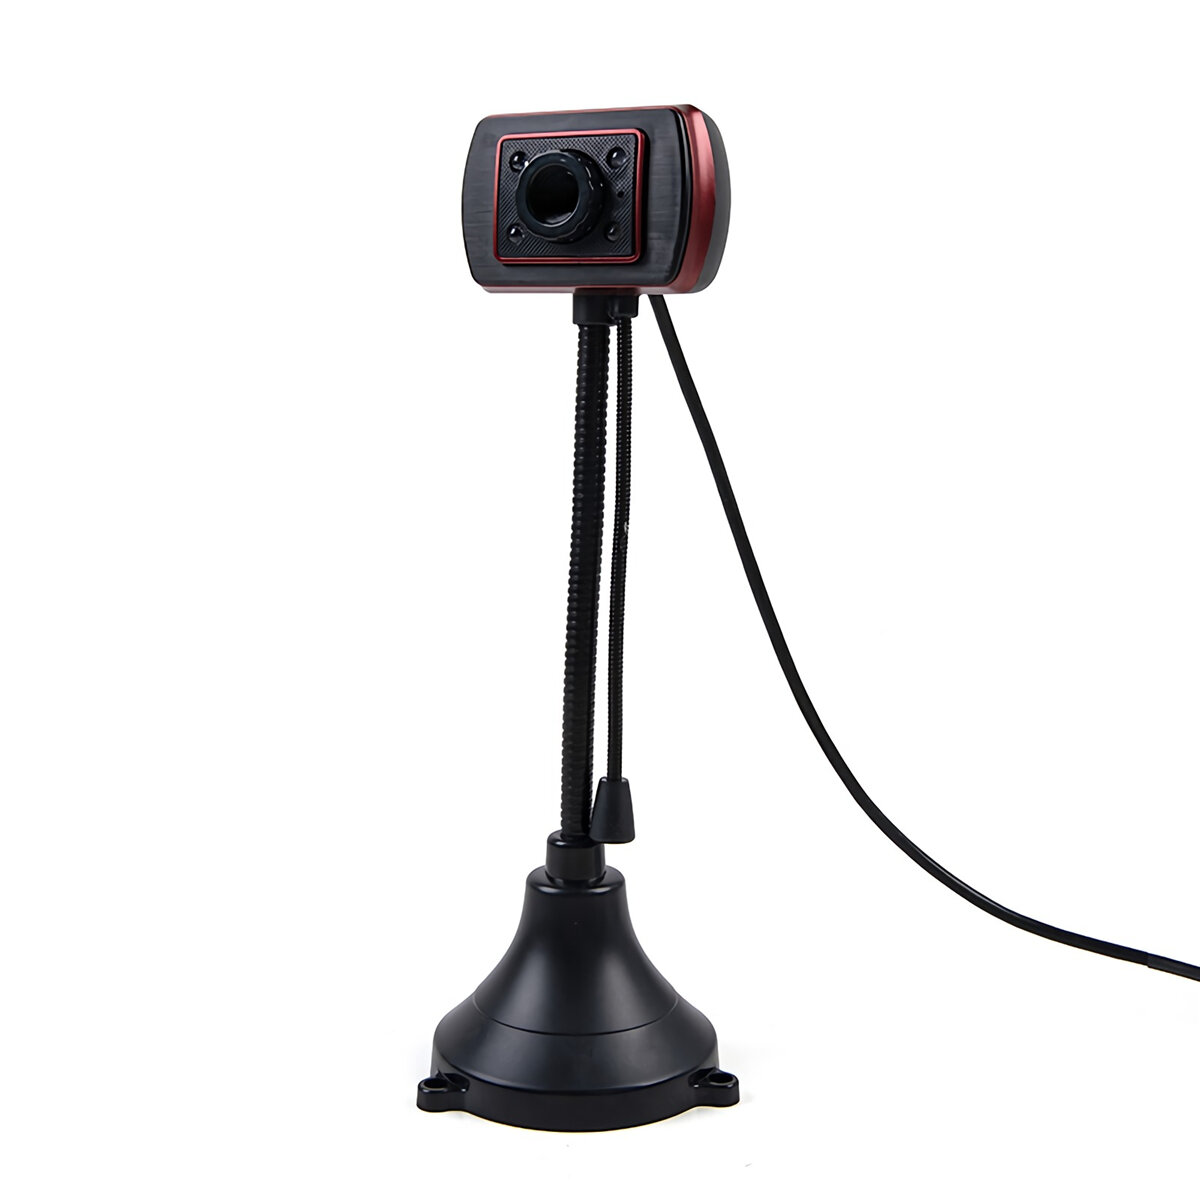 S620 480P HD Webcam CMOS USB 2.0 Wired Computer Web Camera Built-in Microphone Camera for Desktop Computer Notebook PC COD